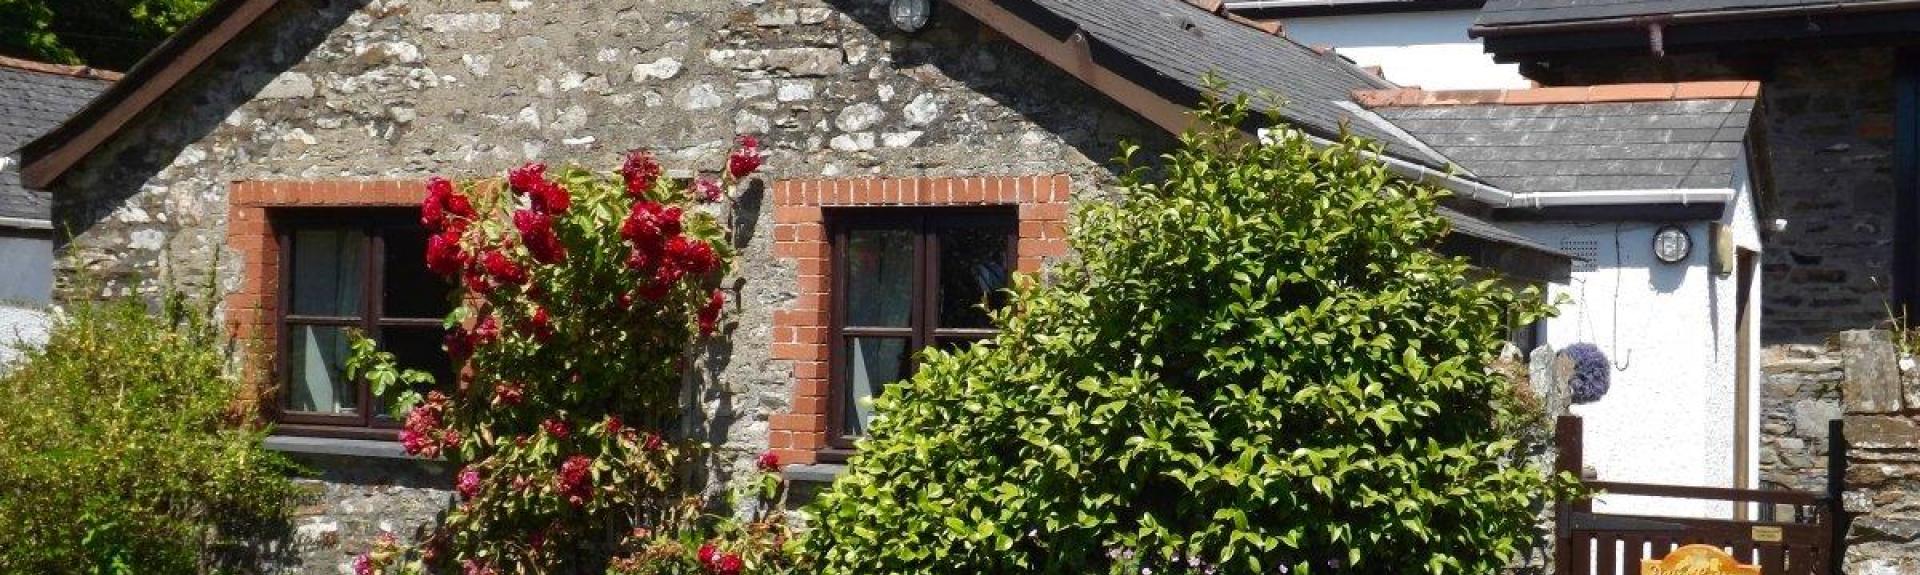 Stone-built, gable end of a cottage with flowering shrubs.